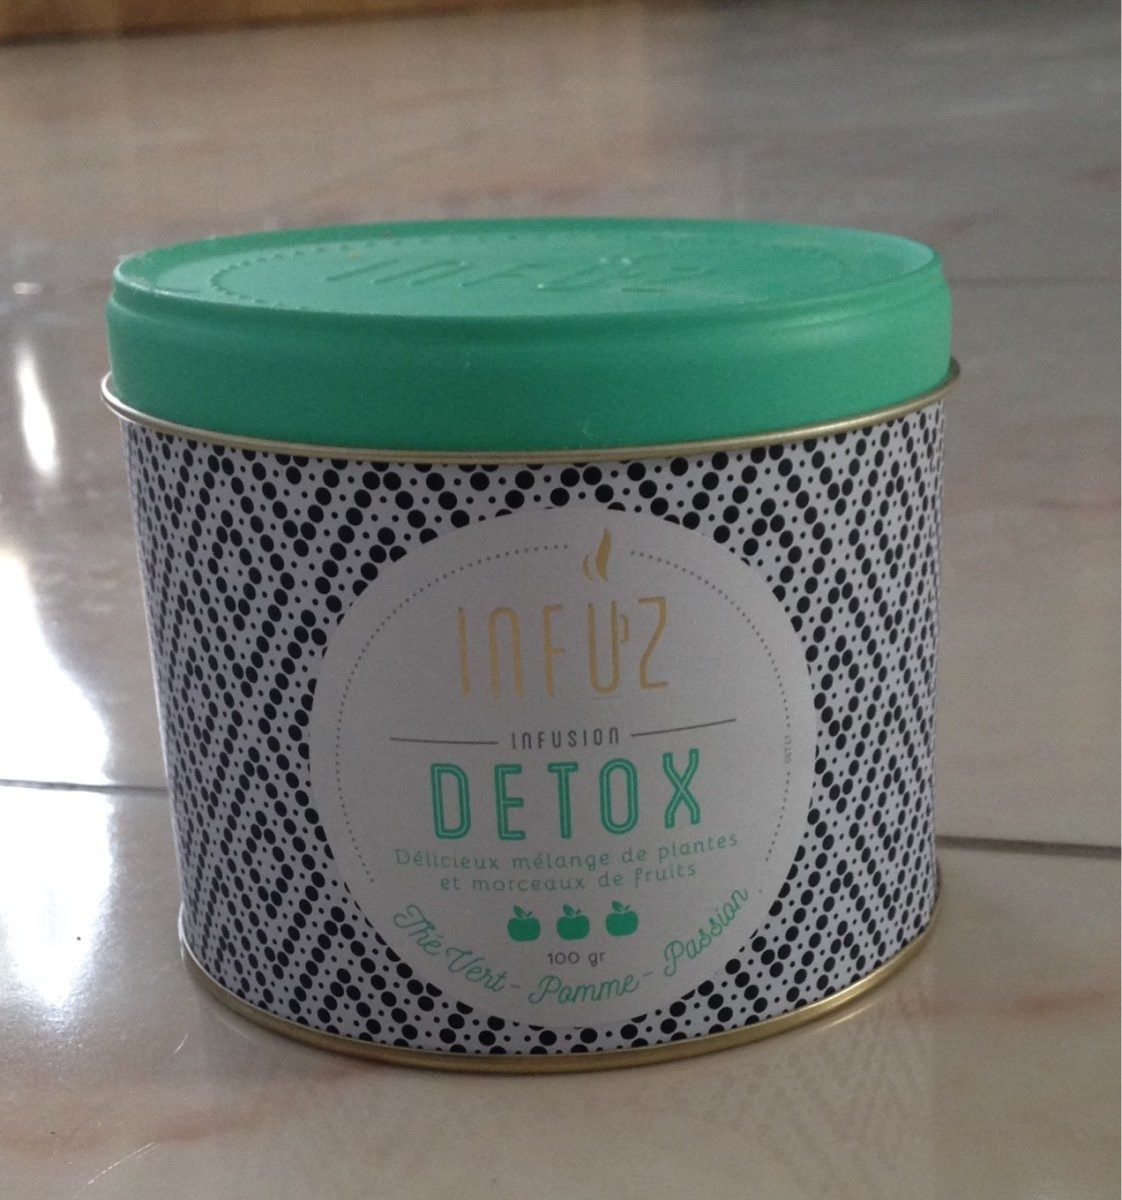 Infusion detox - Product - fr